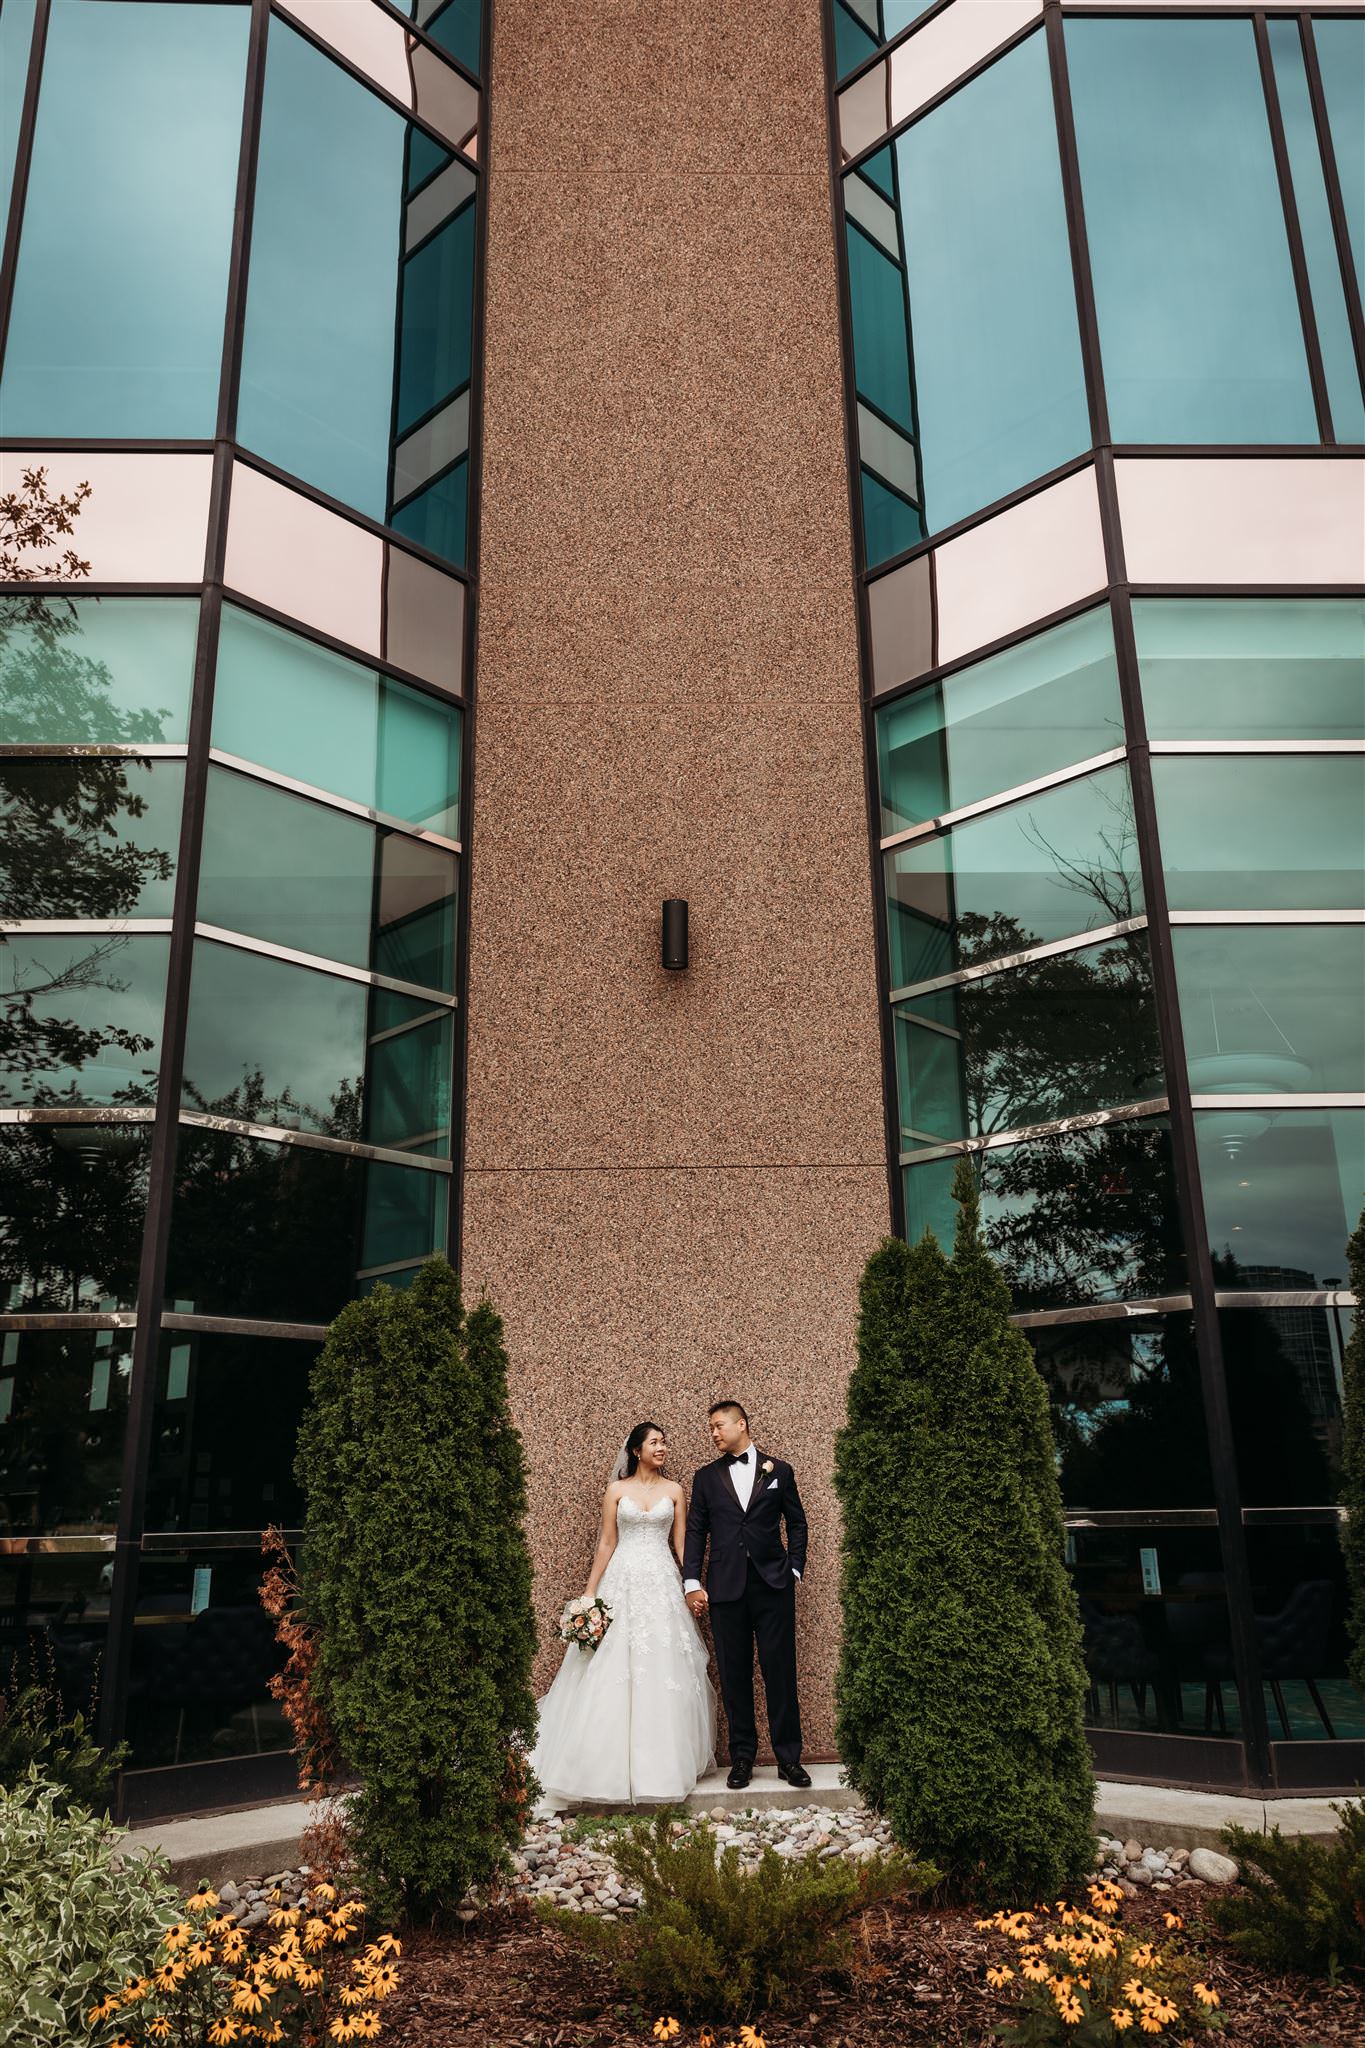 photography locations in markham, photography locations in toronto, hilton markham wedding photos